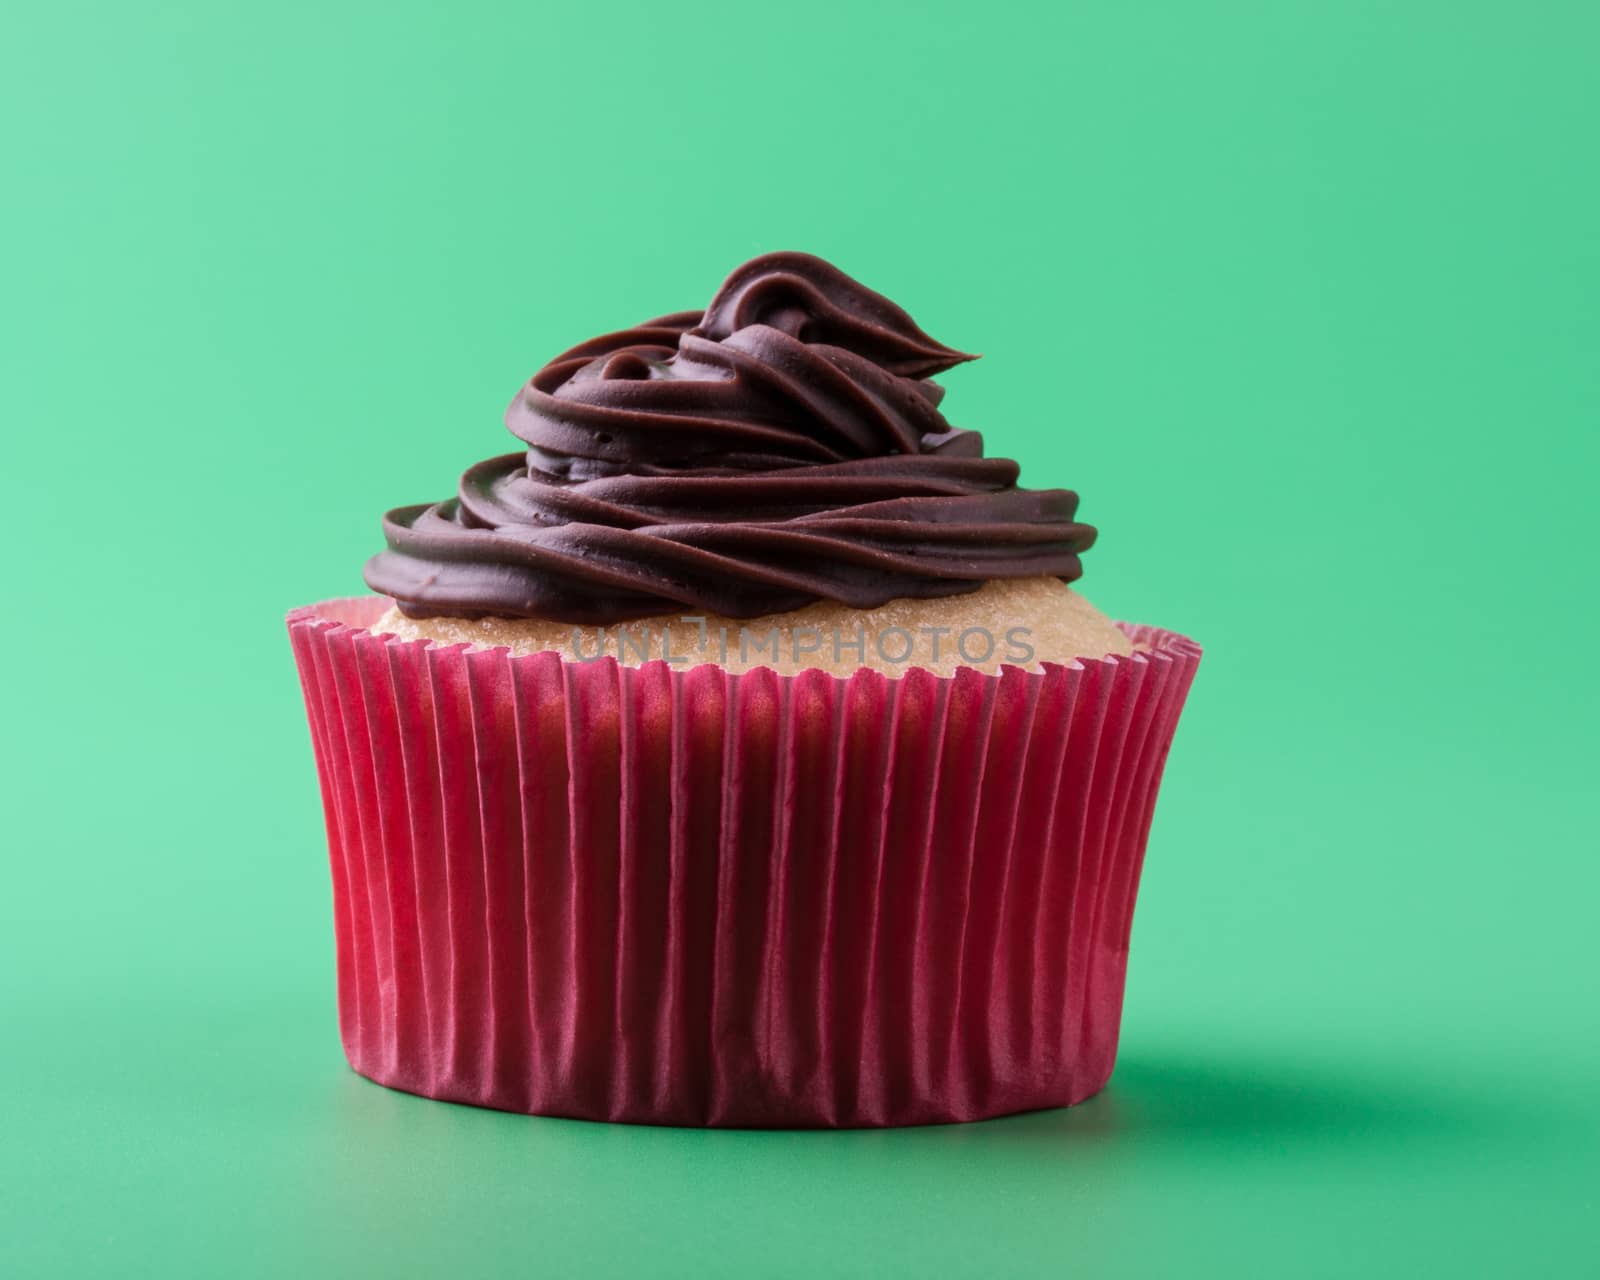 Delicious vanilla cupcake with chocolate icing, green background by lanalanglois